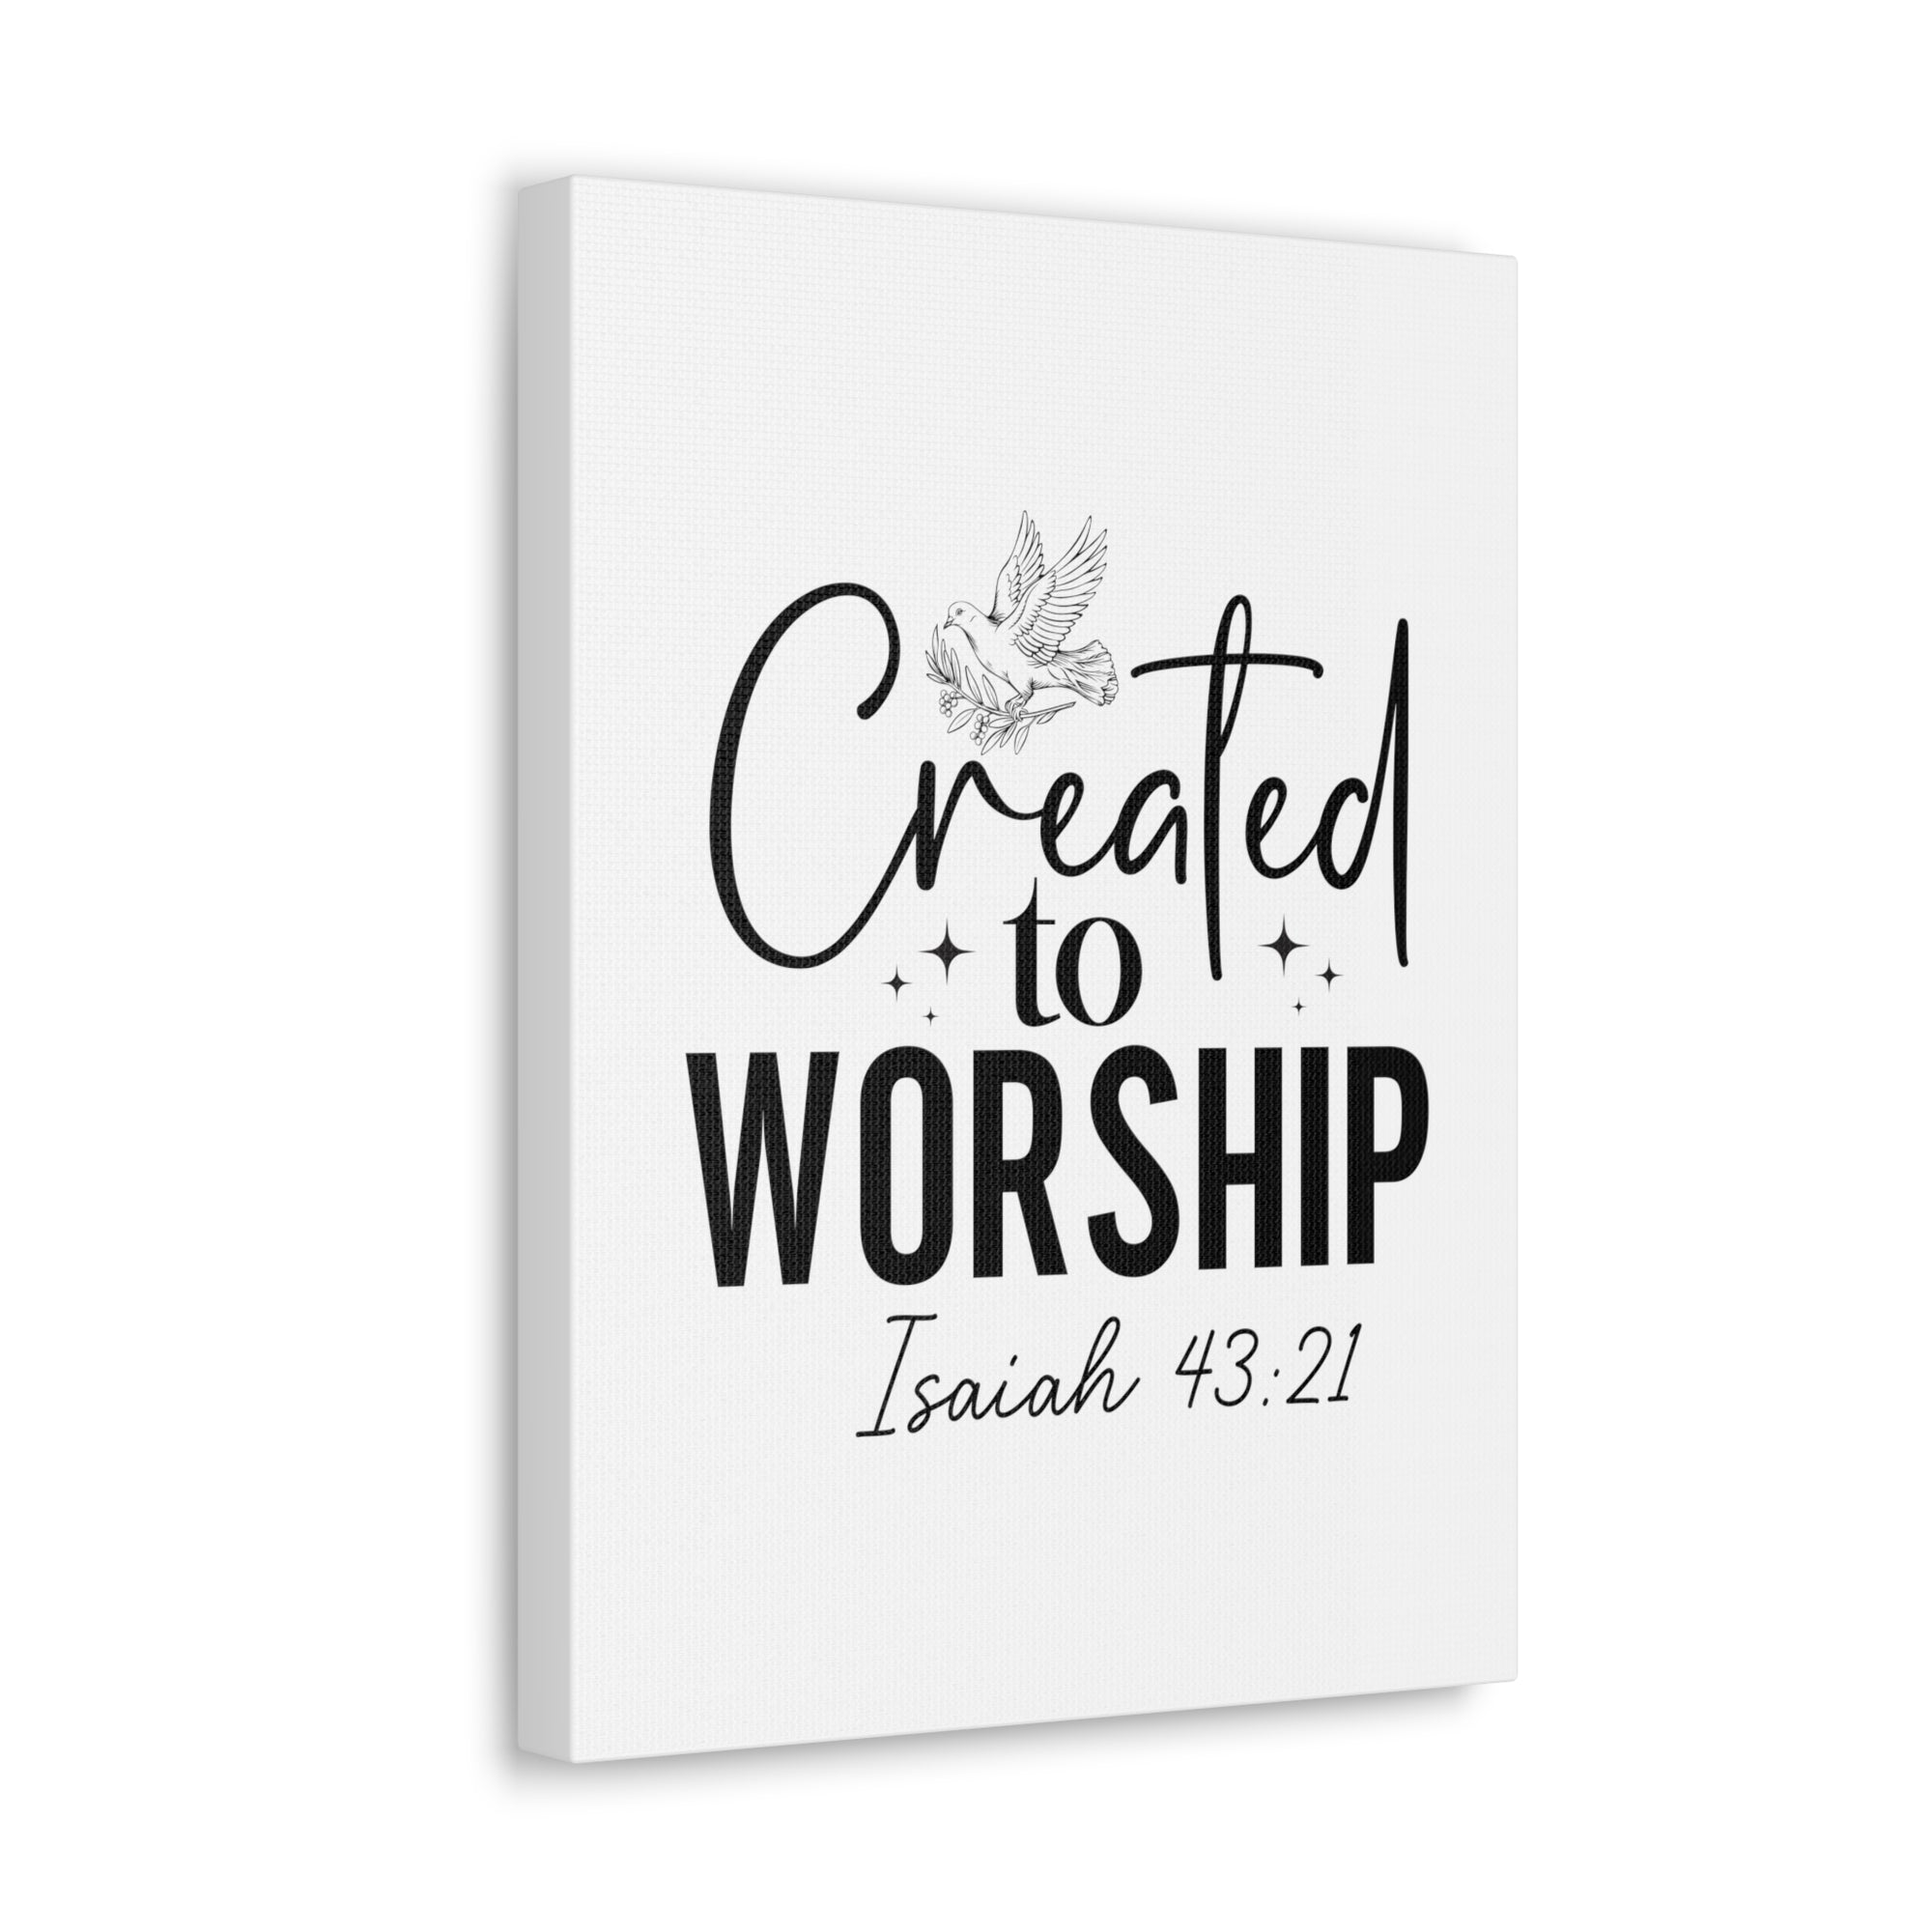 Scripture Walls Isaiah 43:21 Created to Worship Bible Verse Canvas Christian Wall Art Ready to Hang Unframed-Express Your Love Gifts